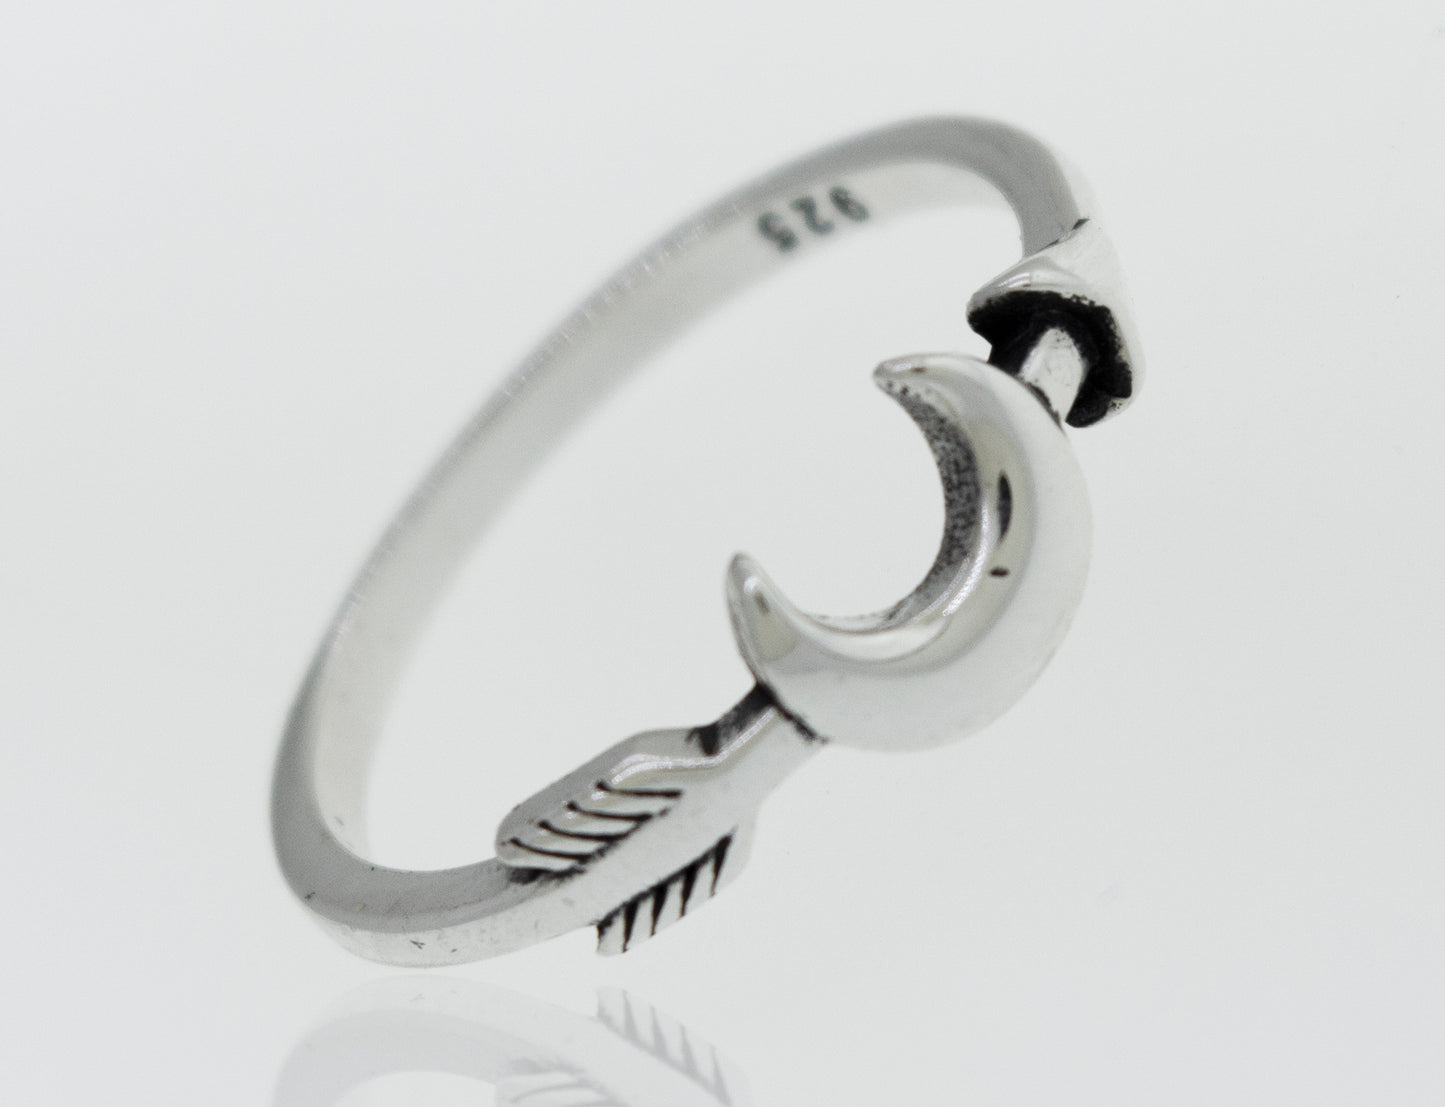 A trendy Moon and Arrow Ring made of high polish 925 sterling silver.